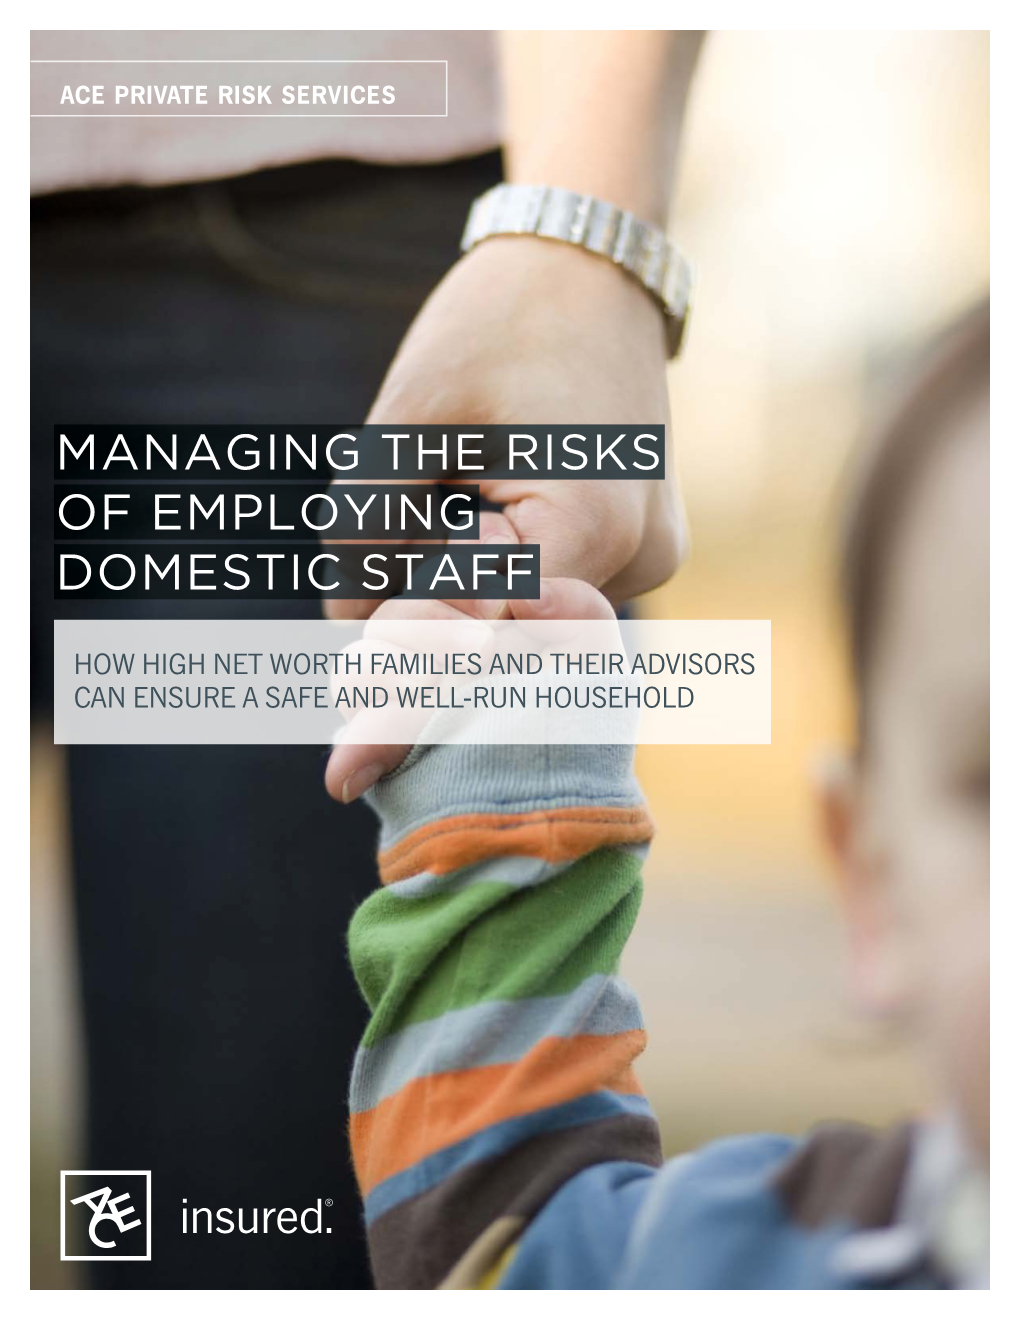 Managing the Risks of Employing Domestic Staff